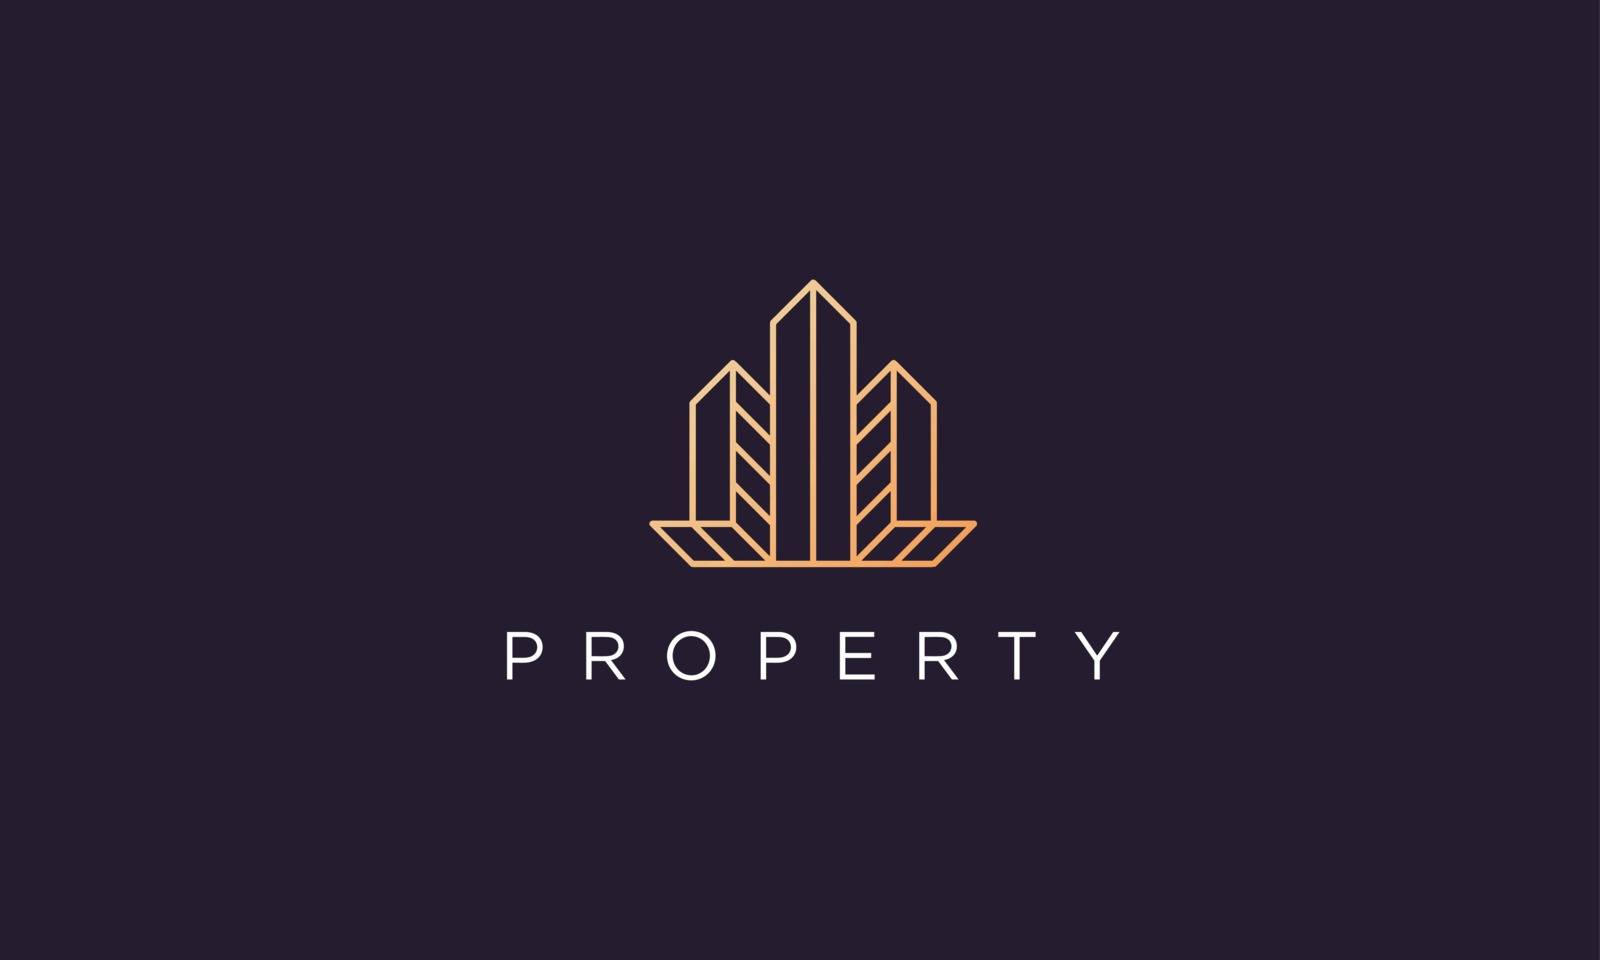 luxury and classy logo design for real estate agent in a simple and modern style by murnifine